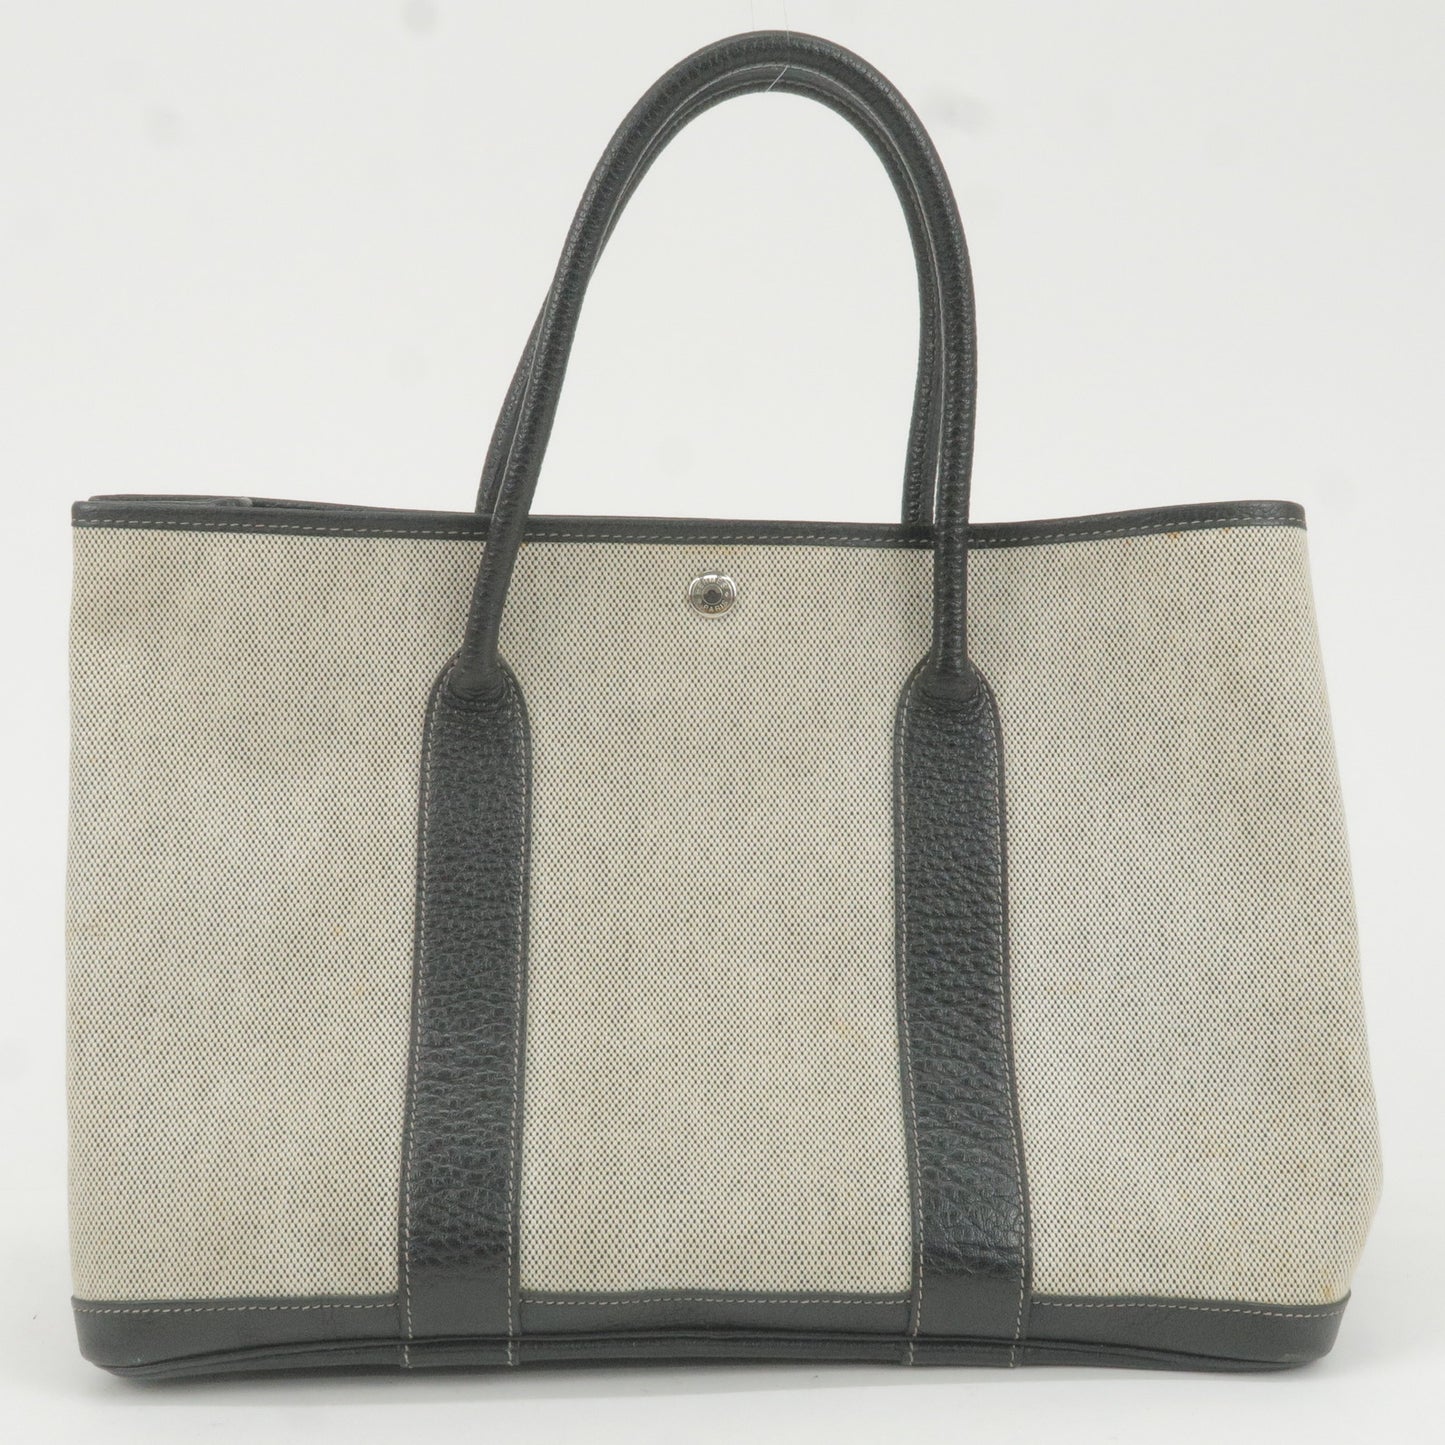 HERMES Canvas Leather Garden Party PM Tote Bag Ecru Gray